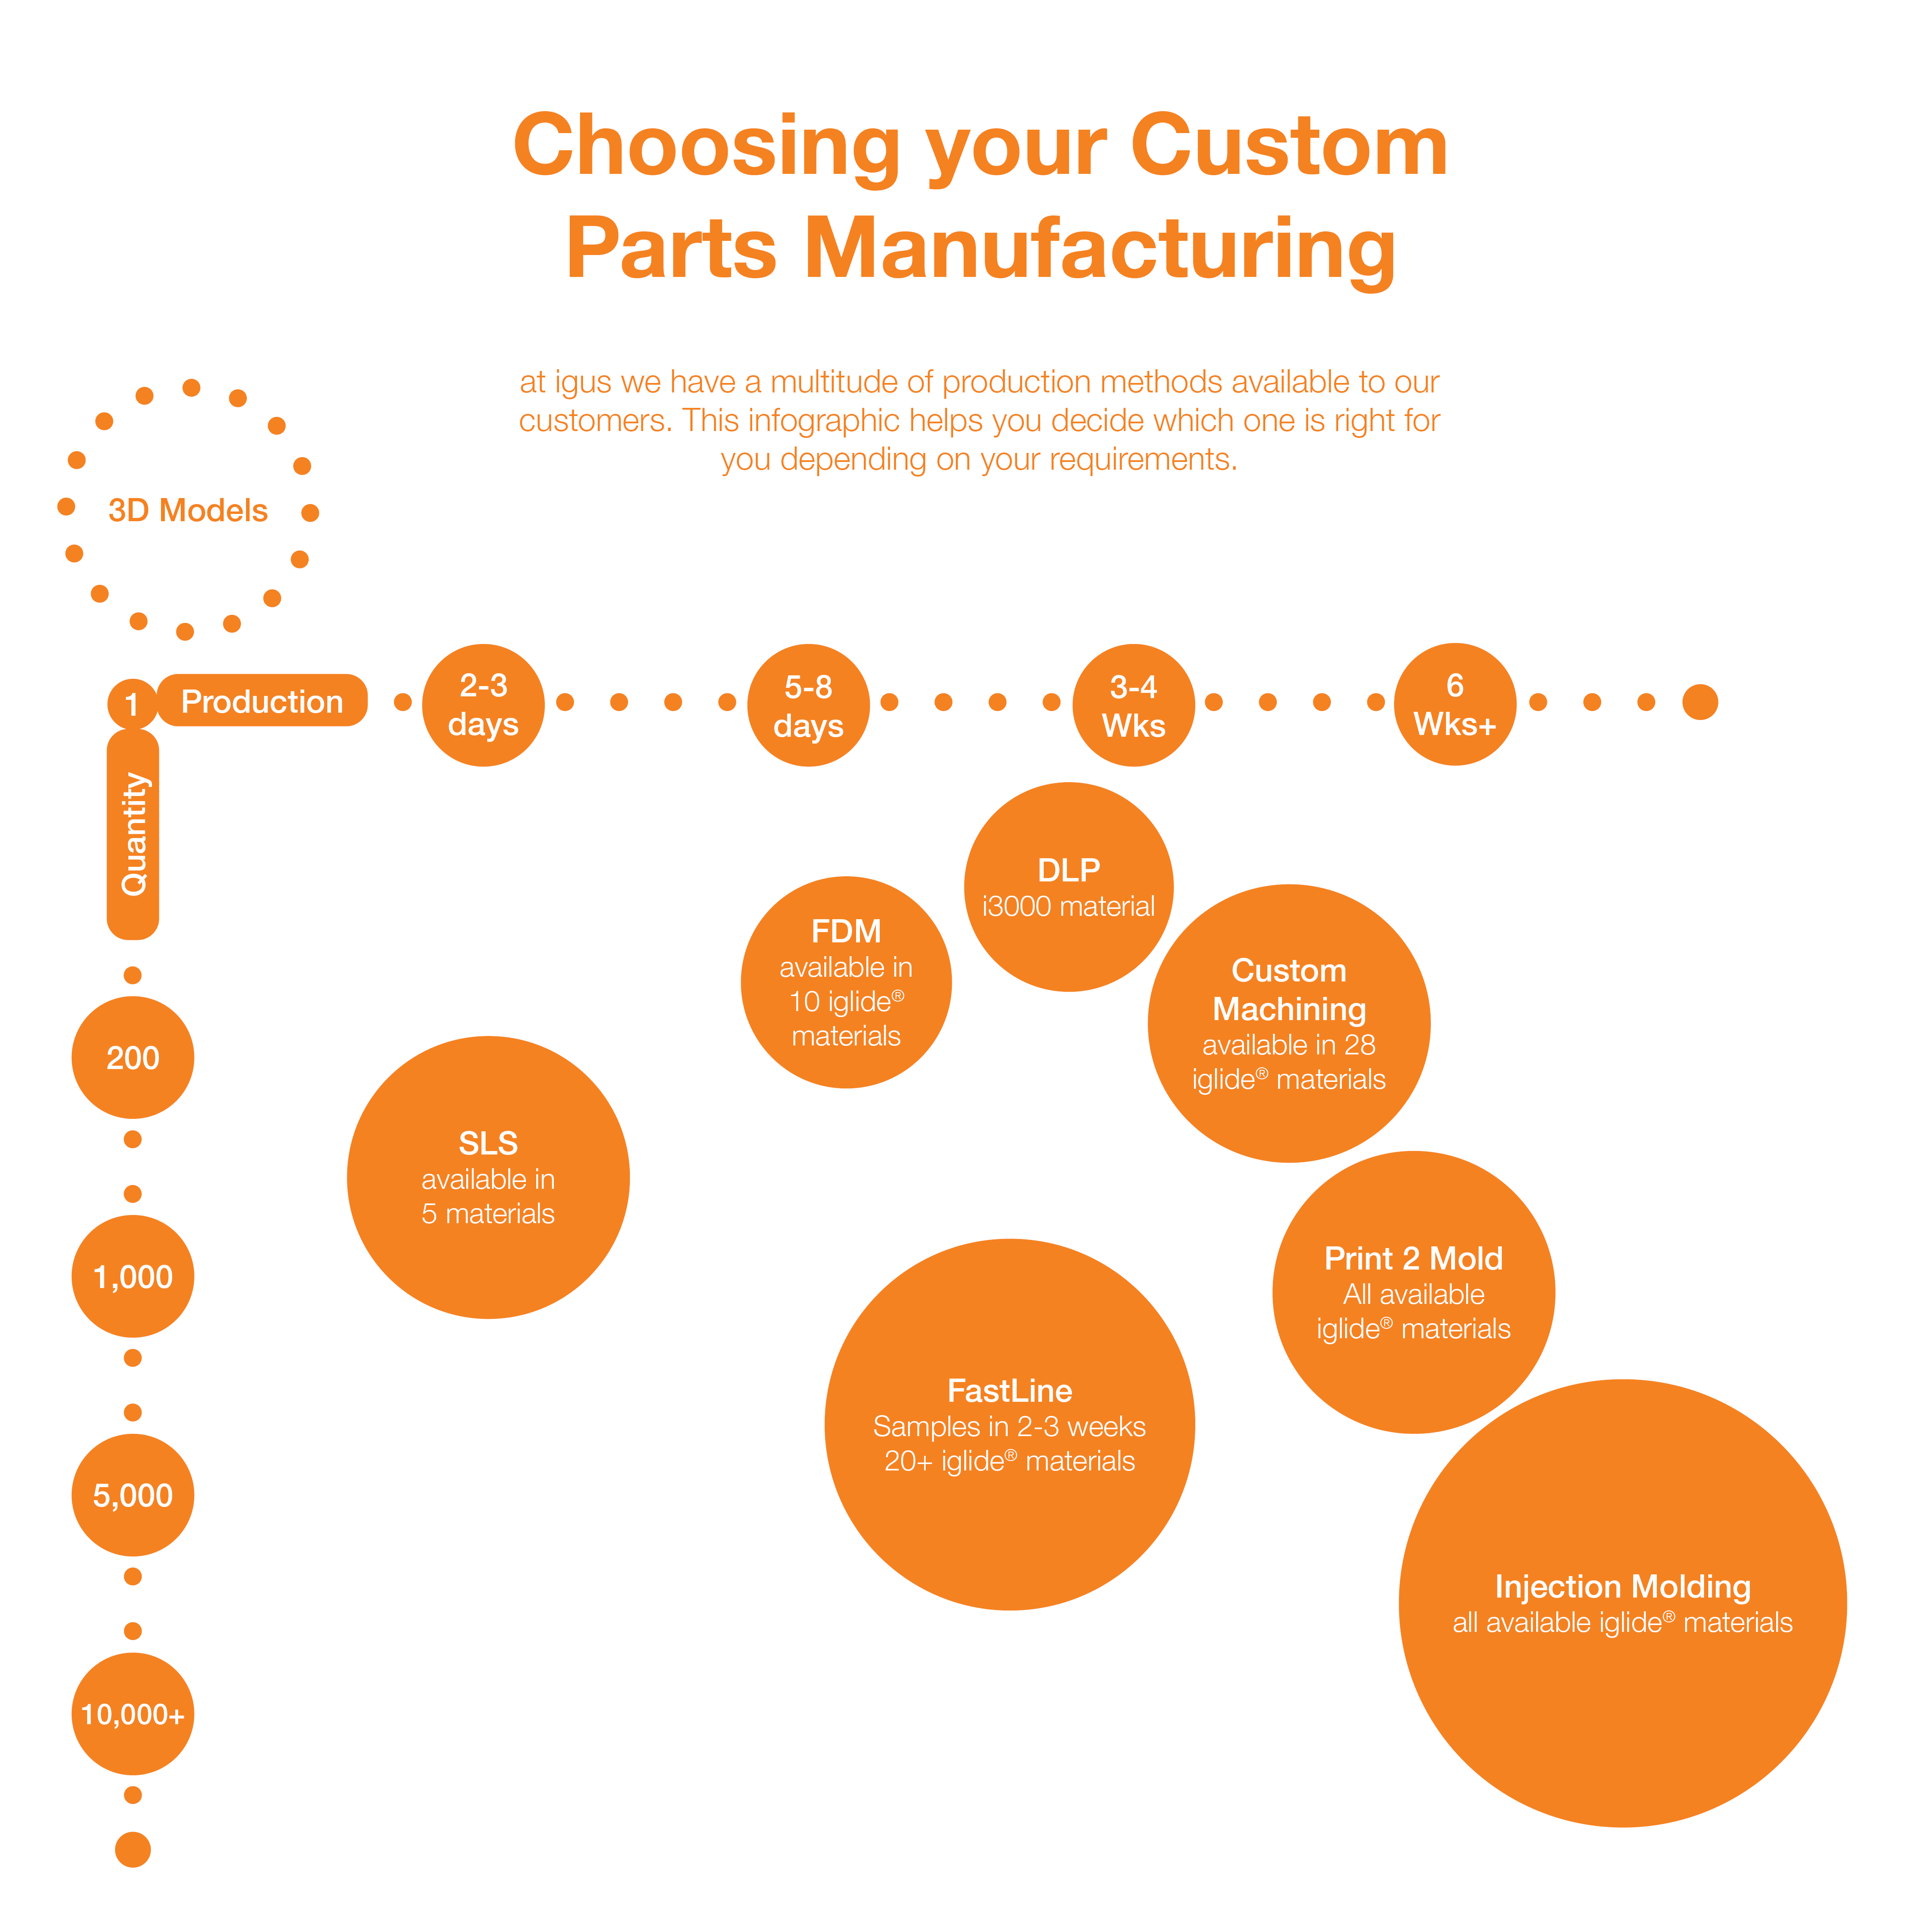 An infographic presenting ideal quantities and expected delivery times of various custom manufacturing methods